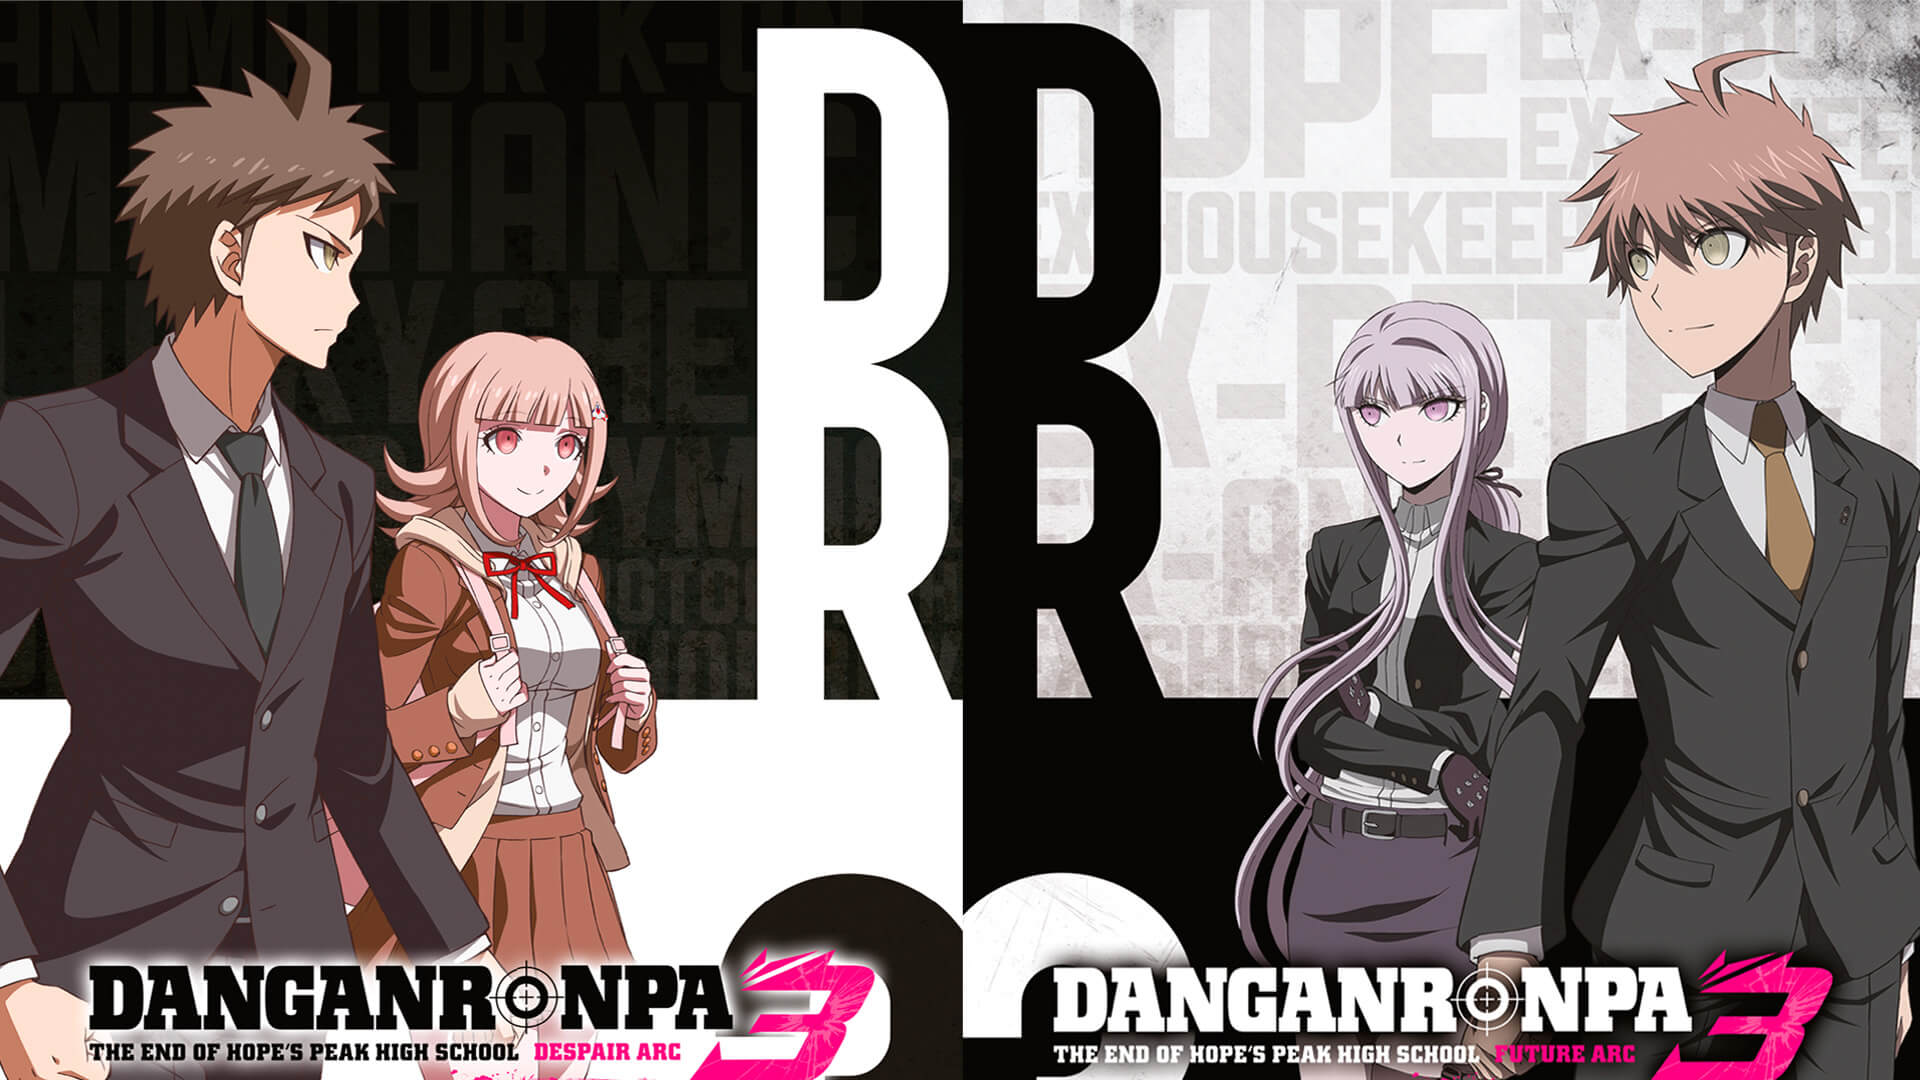 New opinions on the characters + dr3 and dr:ae | Danganronpa Amino